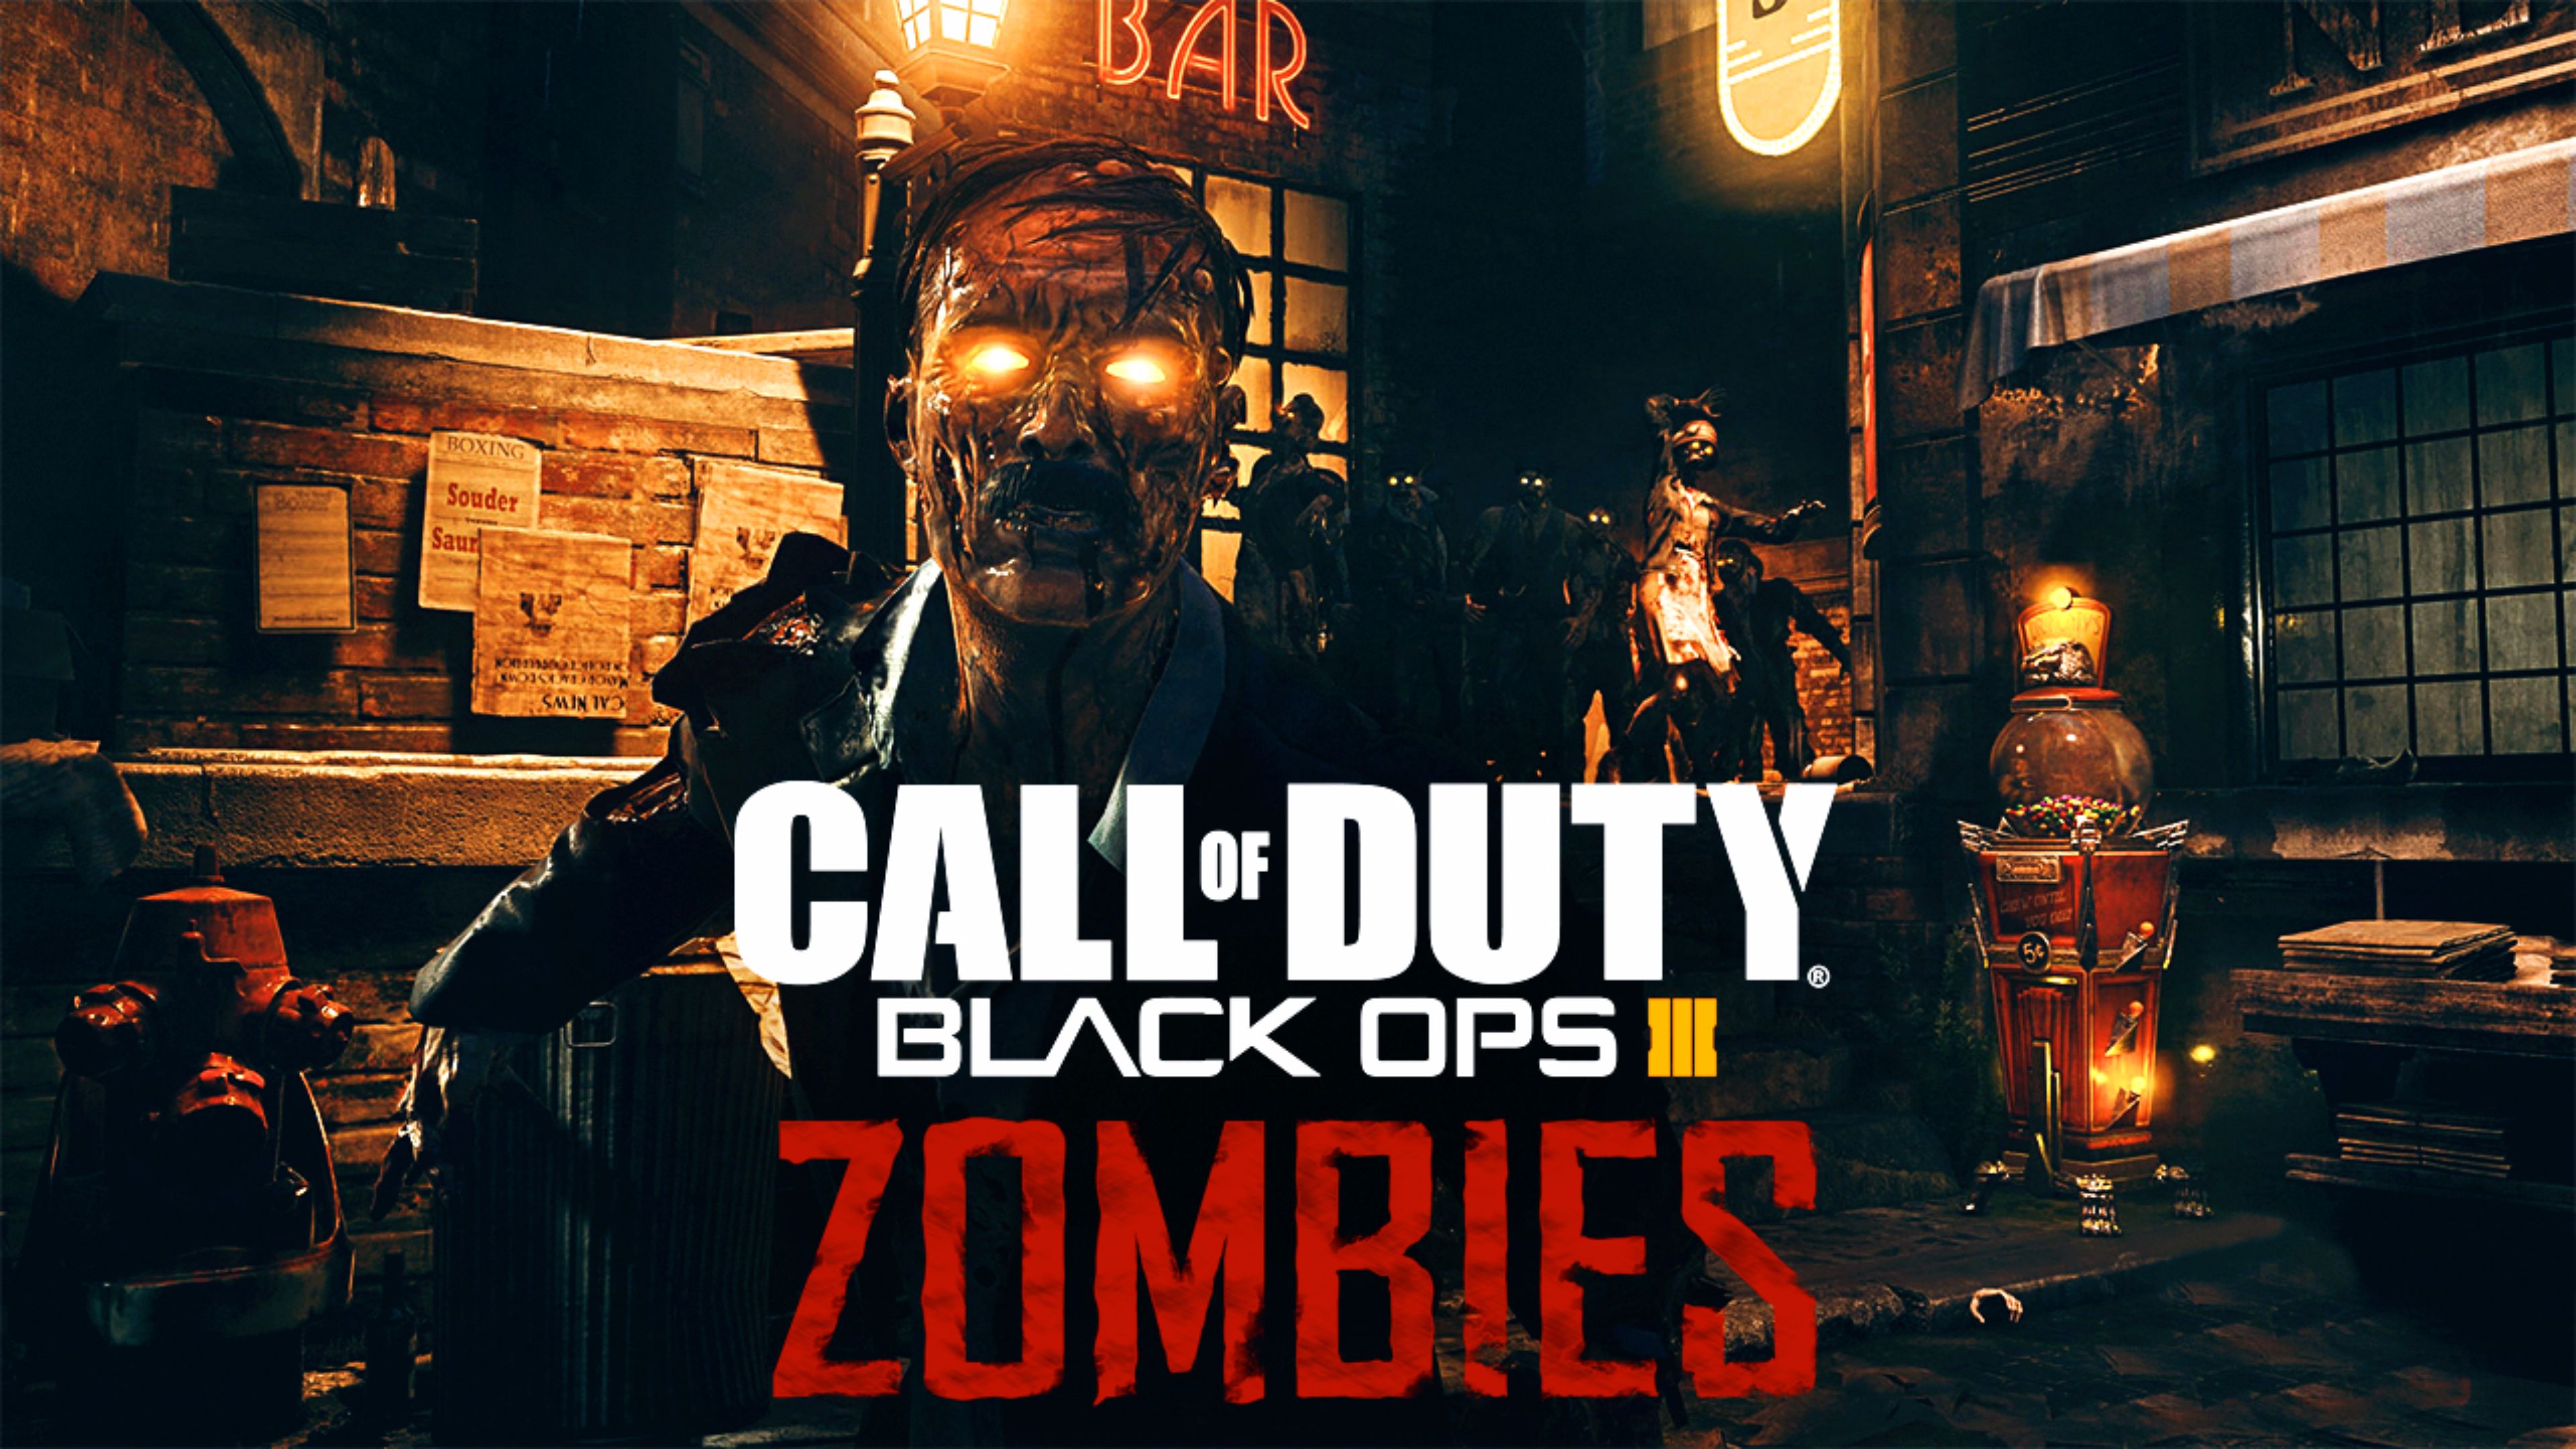 Top Zombies 2016 Call of Duty Black Ops 3 4K Wallpaper | Free 4K ...